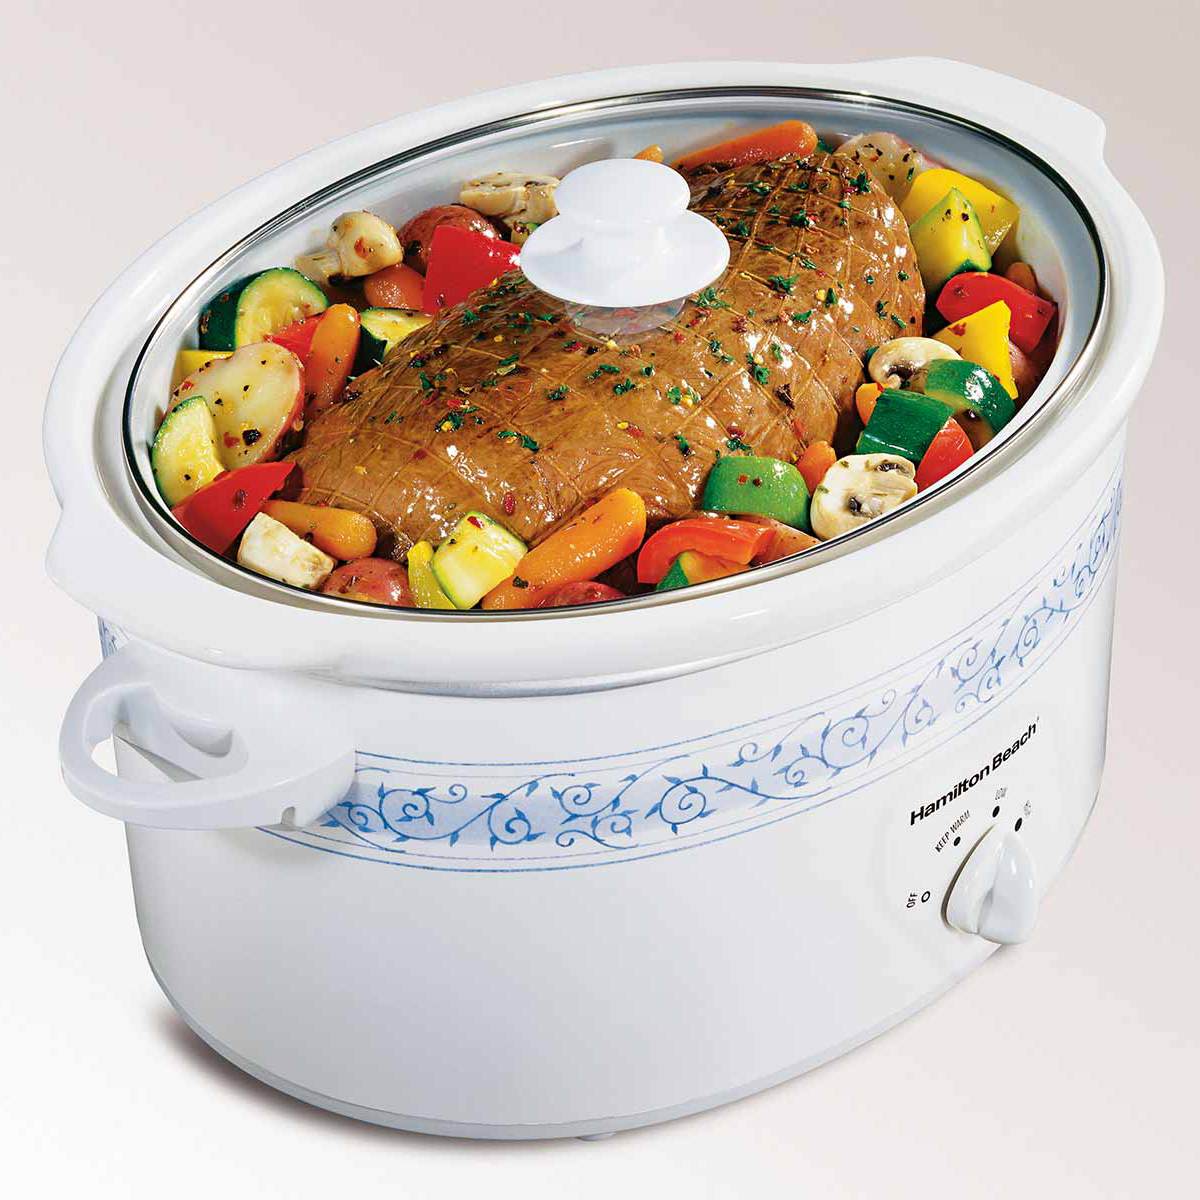 7 Quart Oval Slow Cooker With Travel Case (33690BV)